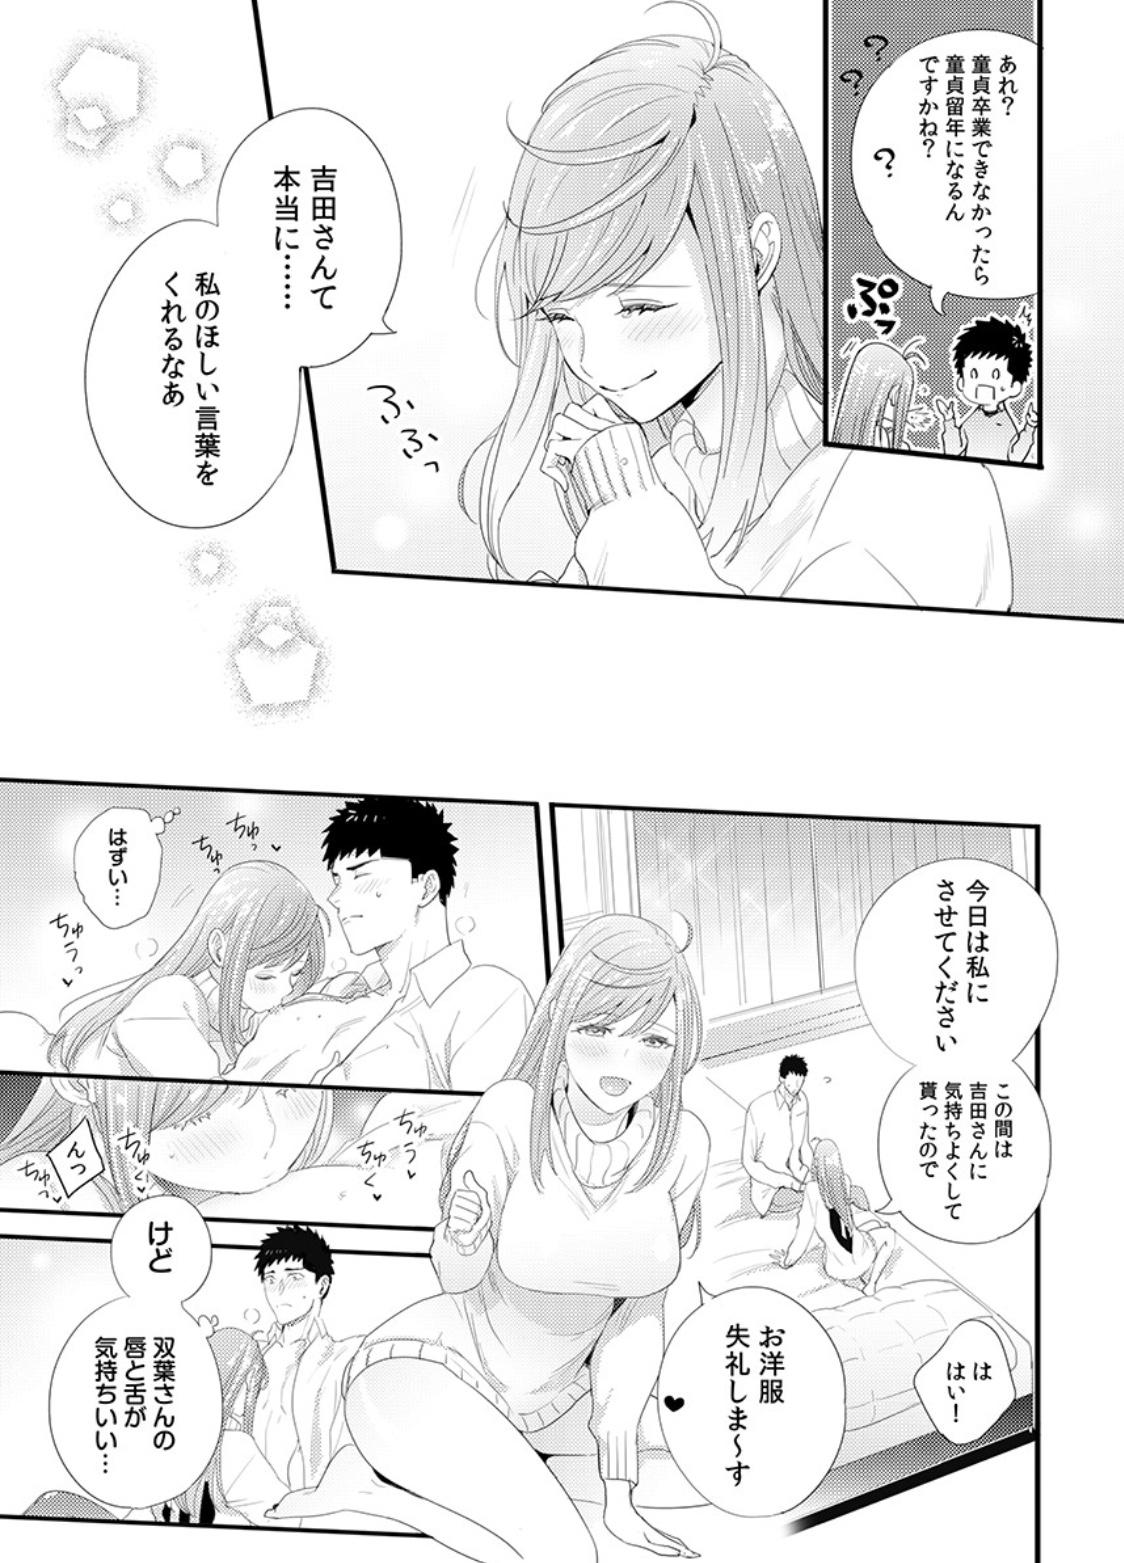 Please Let Me Hold You Futaba-San! Ch. 1+2 48